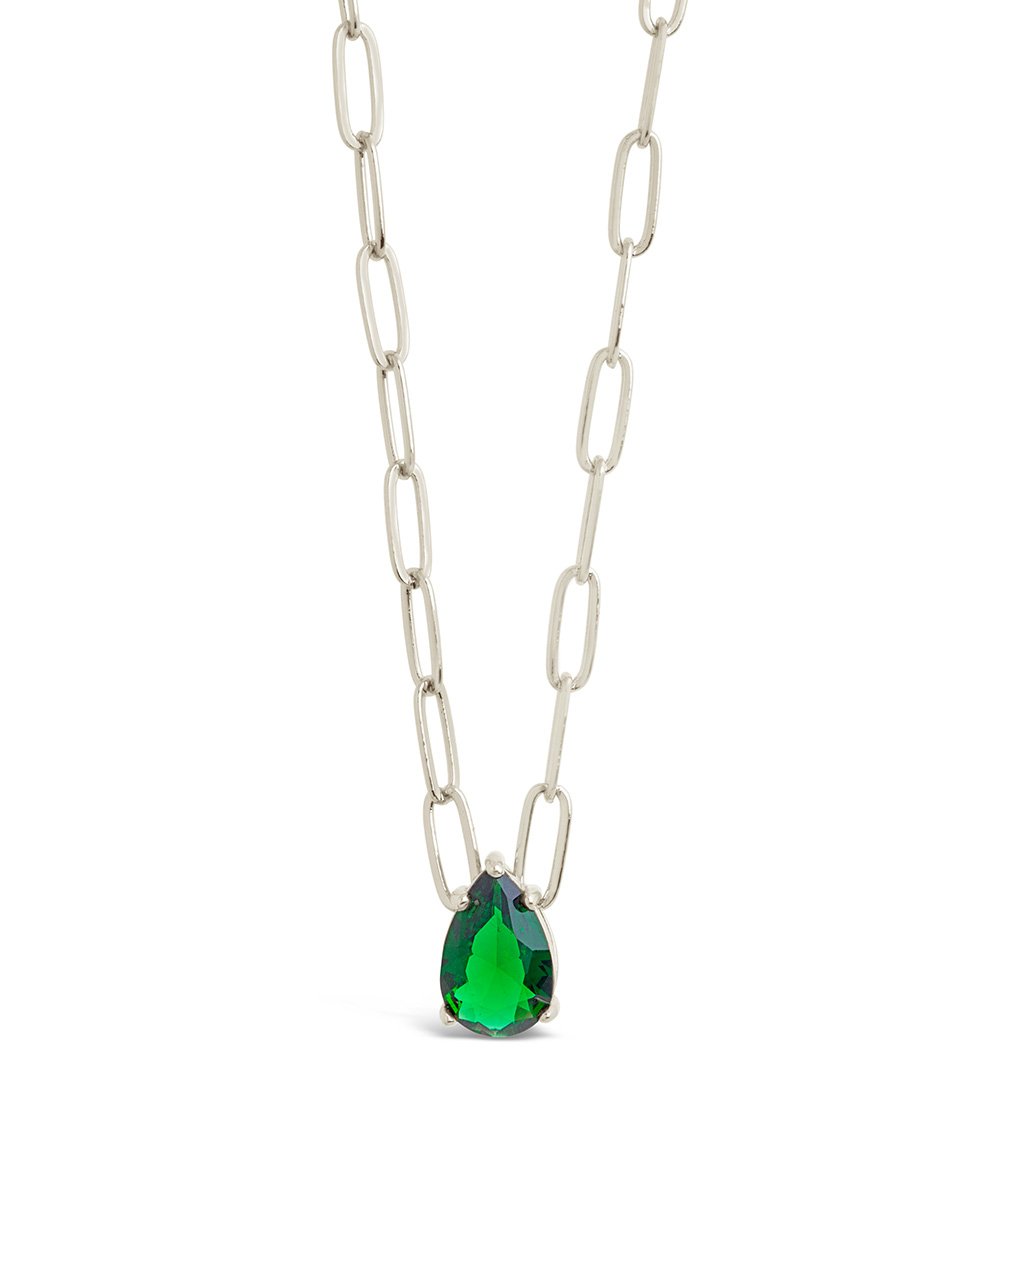 Paperclip Chain with Teardrop Pendant Necklace Sterling Forever Silver Emerald 